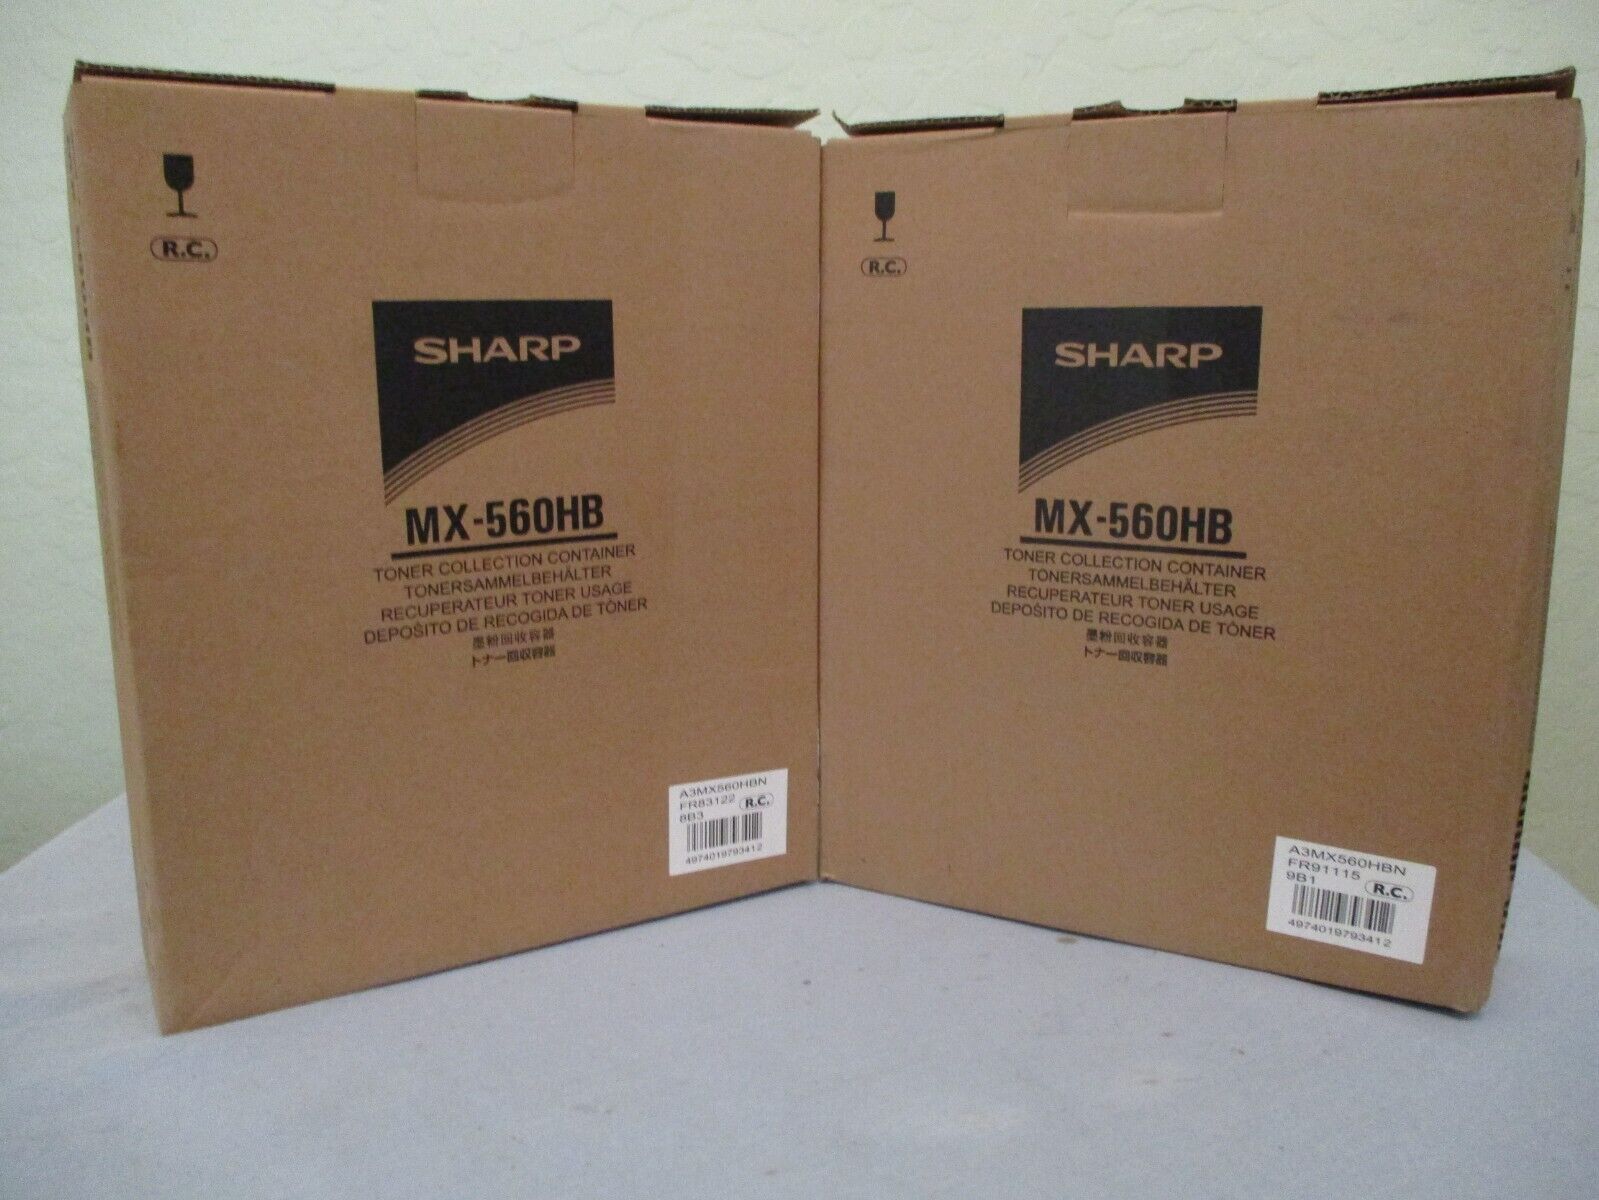 Genuine Sharp MX-560HB Toner Collection Container Lot of 2 New